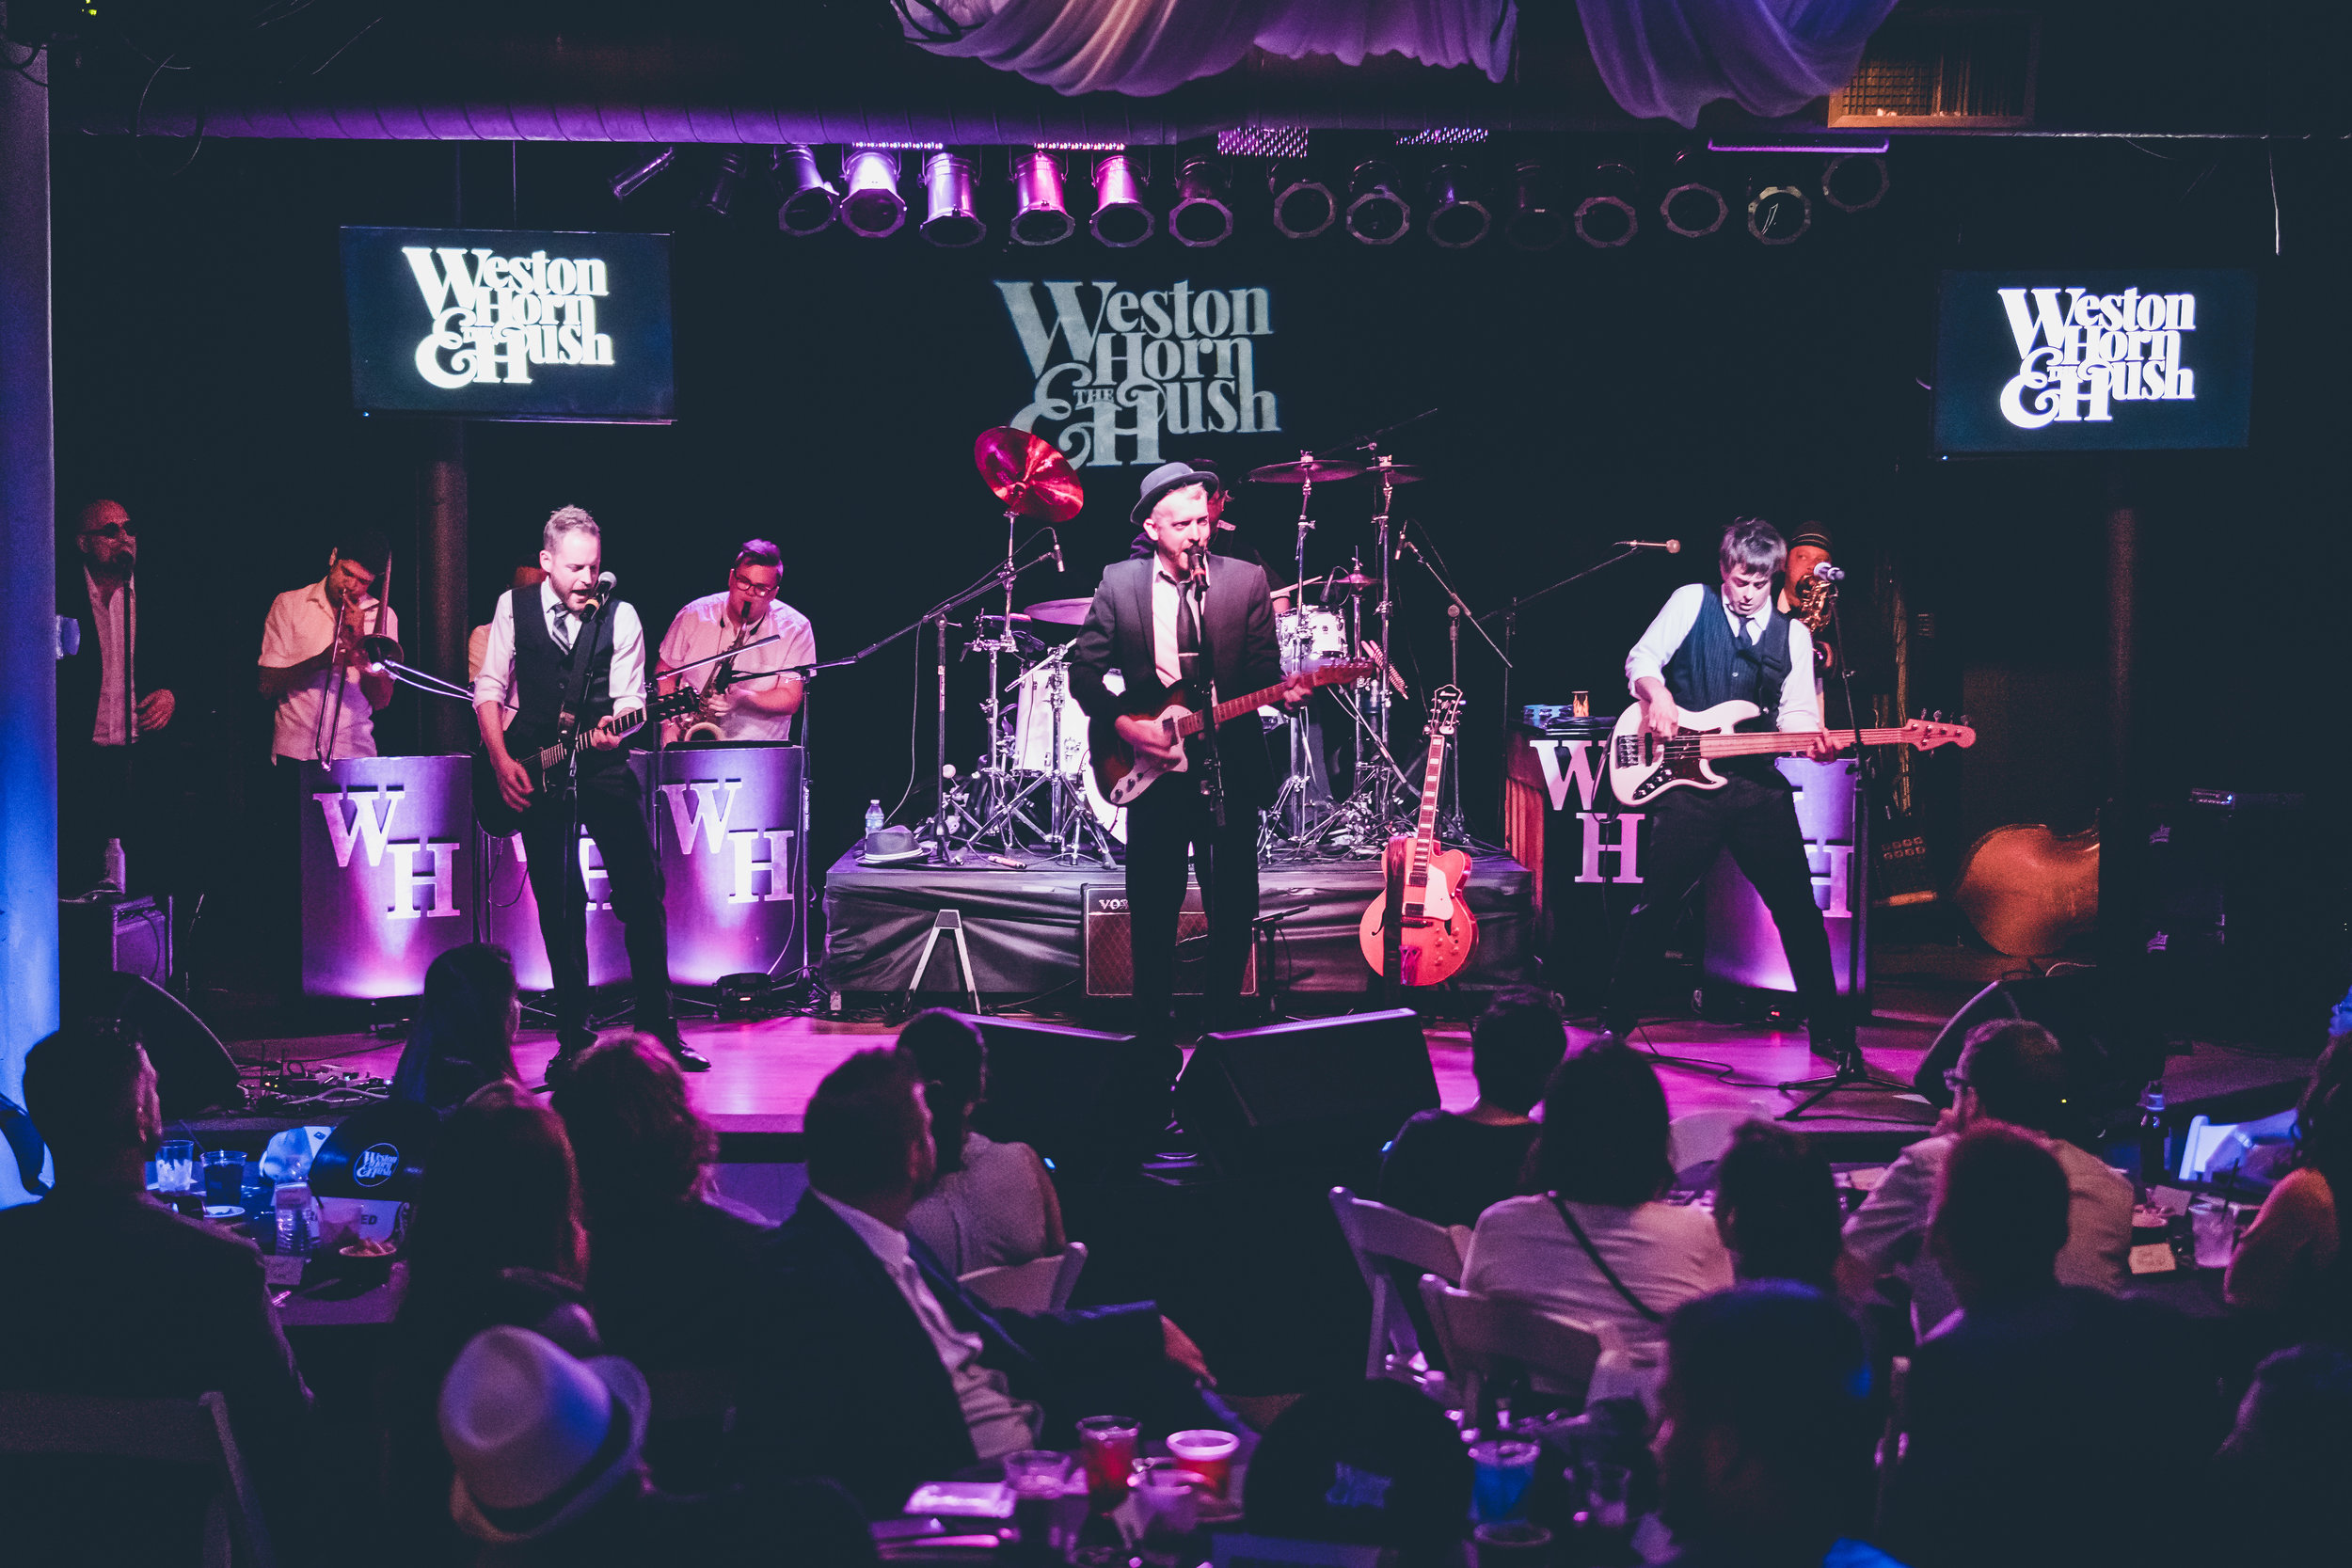 Weston Horn and The Hush CD Release at IDL Ballroom 6-30-17 - Bound For Glory Productions-1.jpg